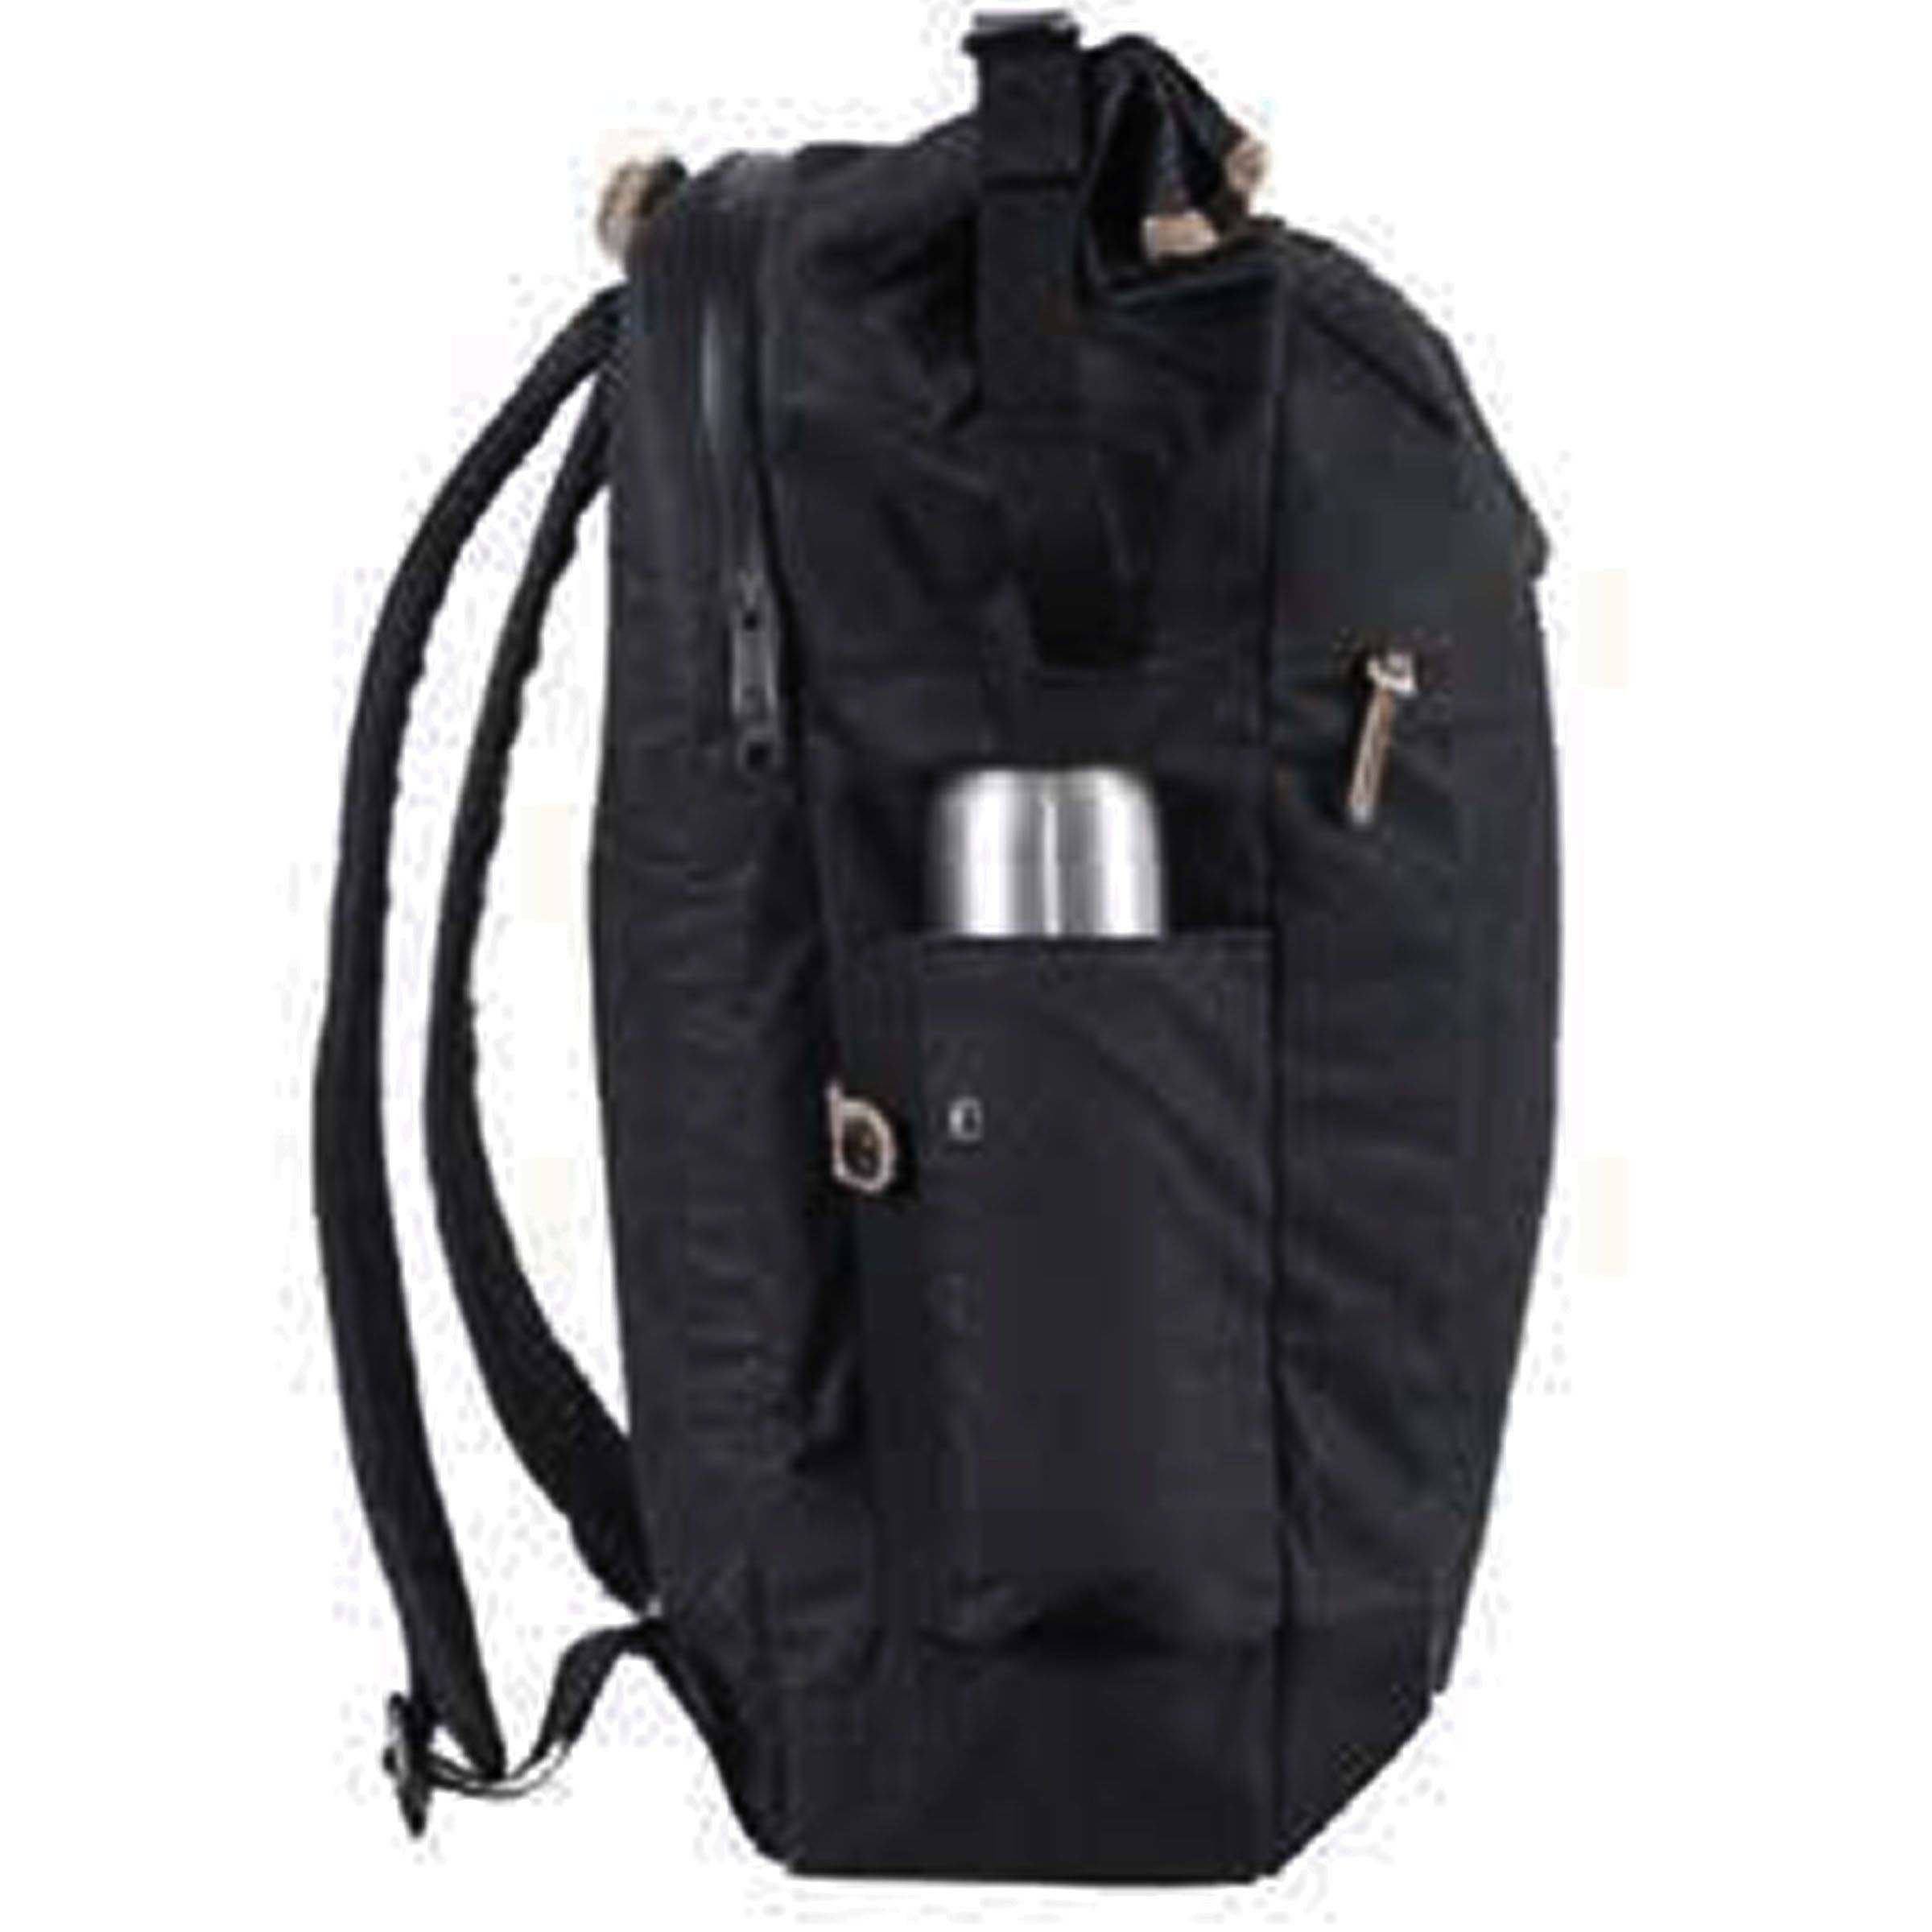 Gara Surf Accessories backpack lateral